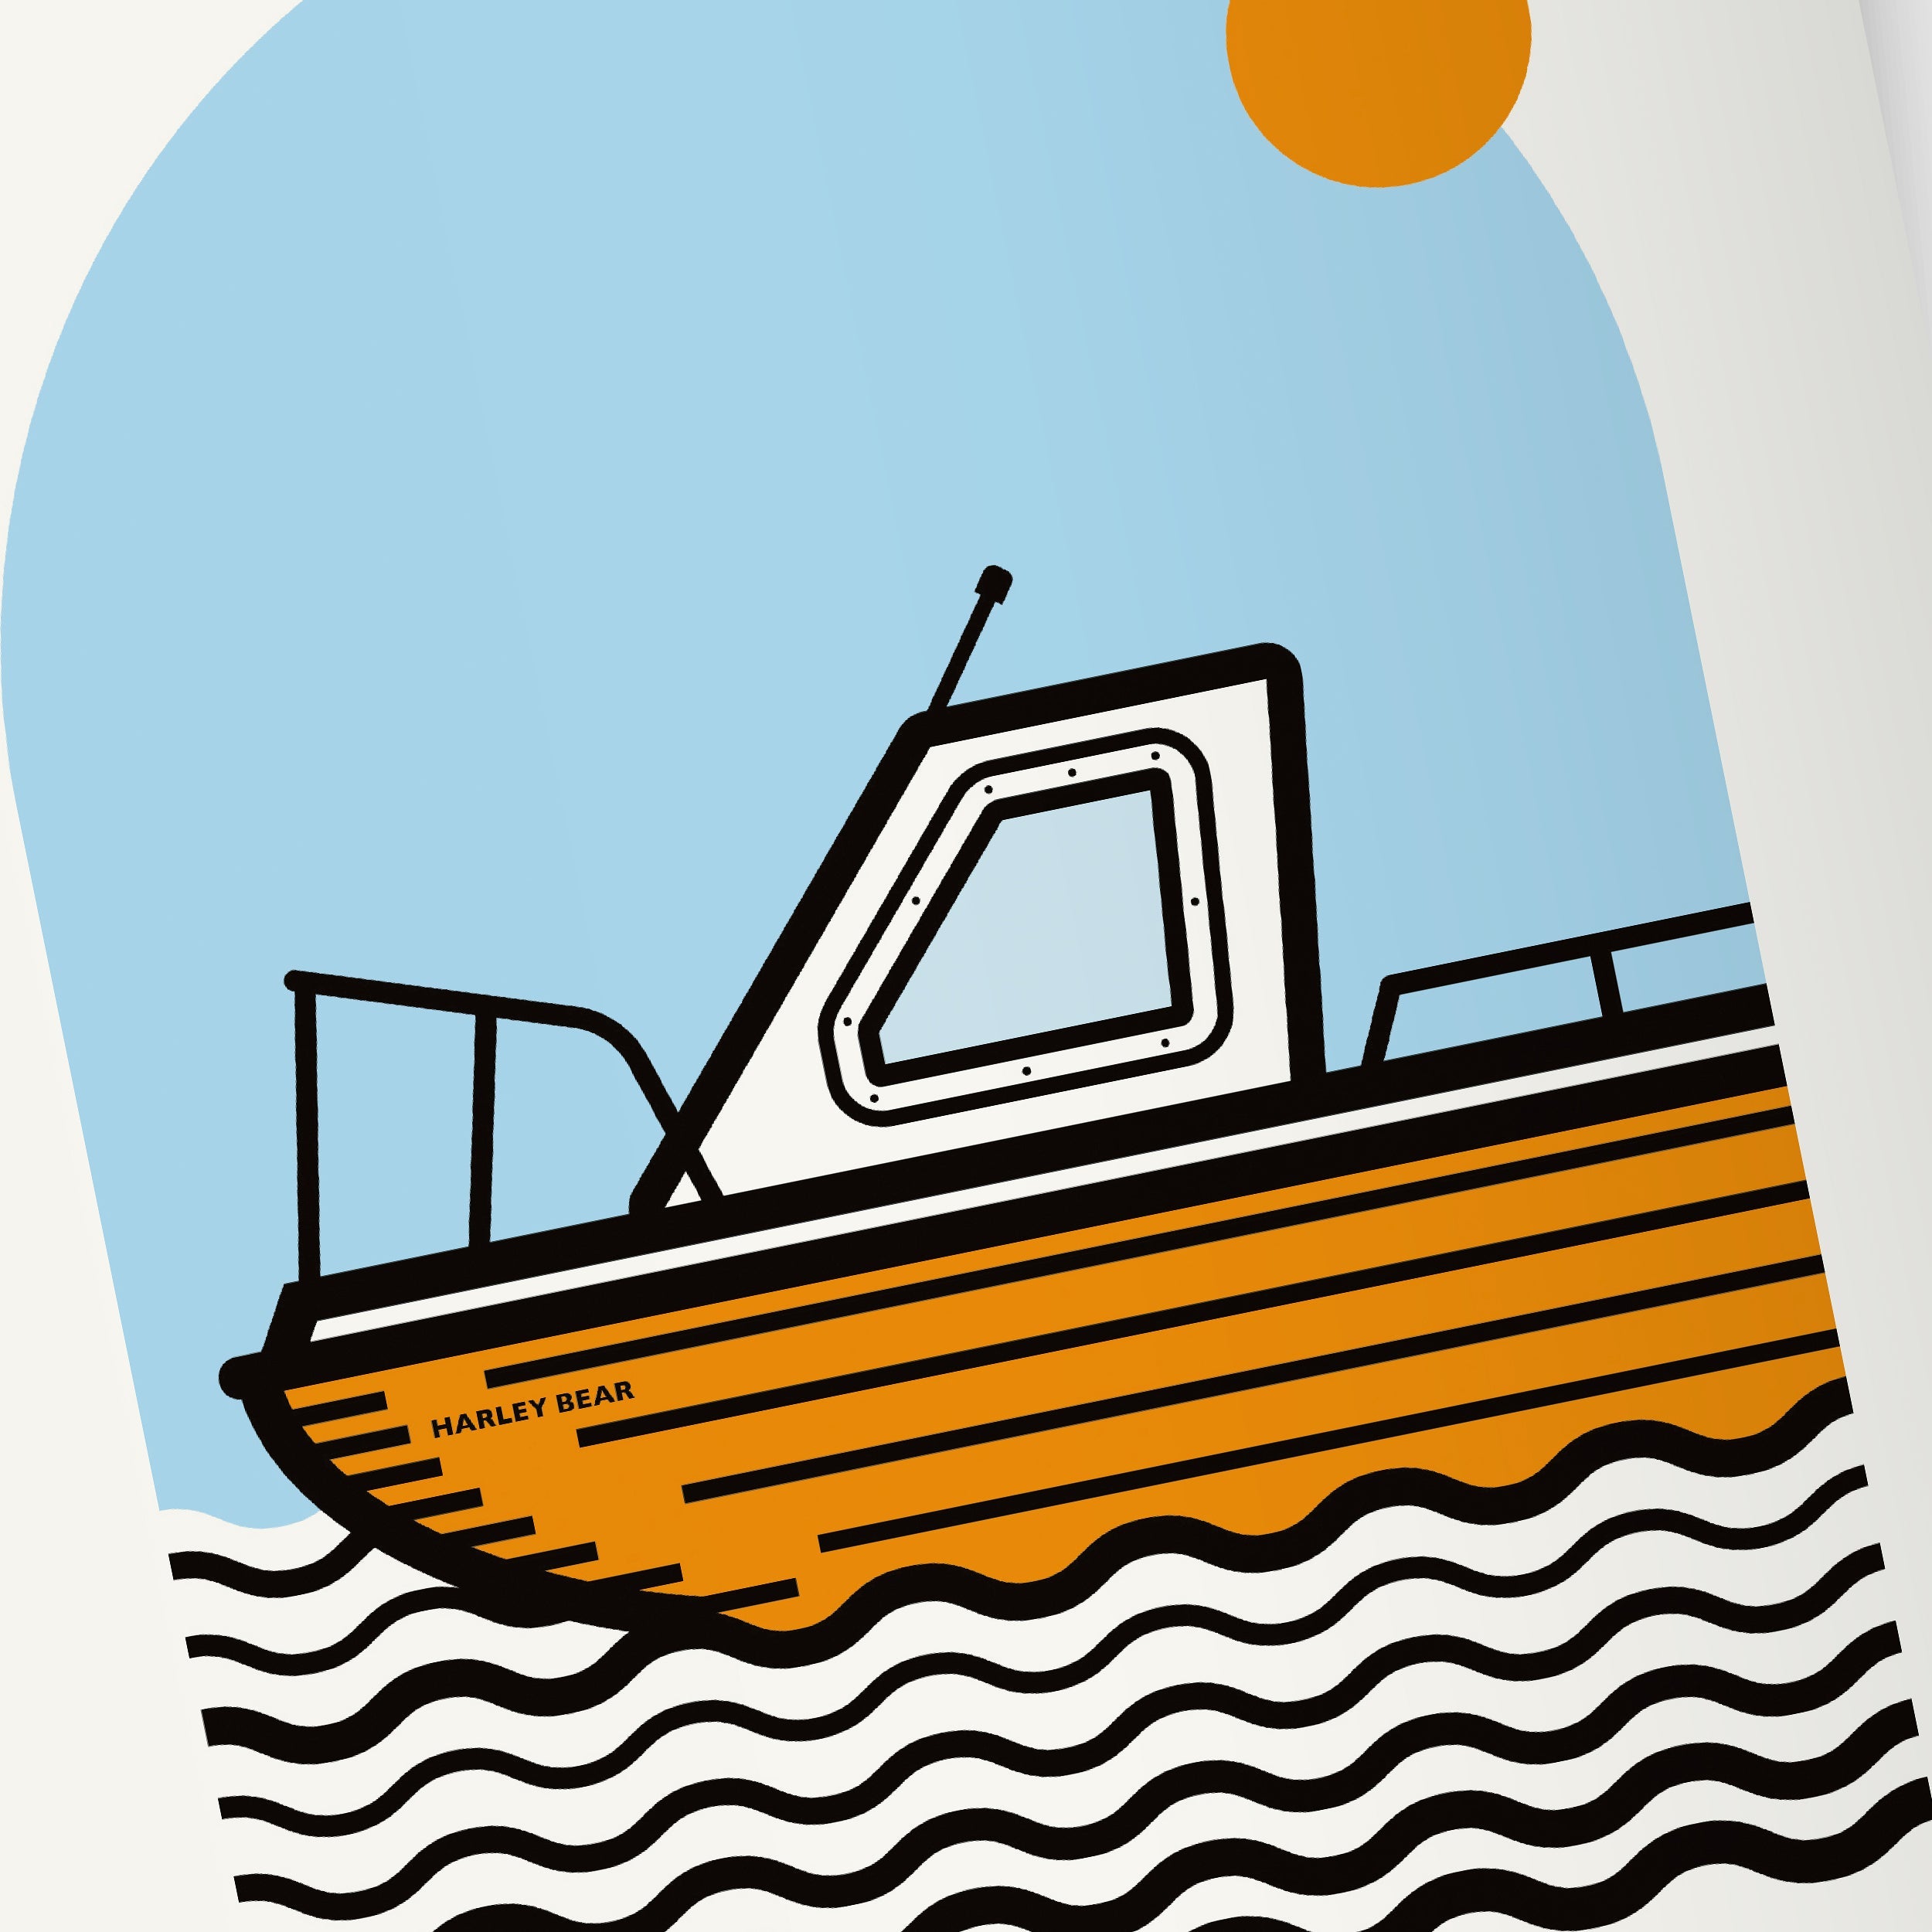 "Out and Aboat" EASTBOURNE (GICLÉE PRINT)